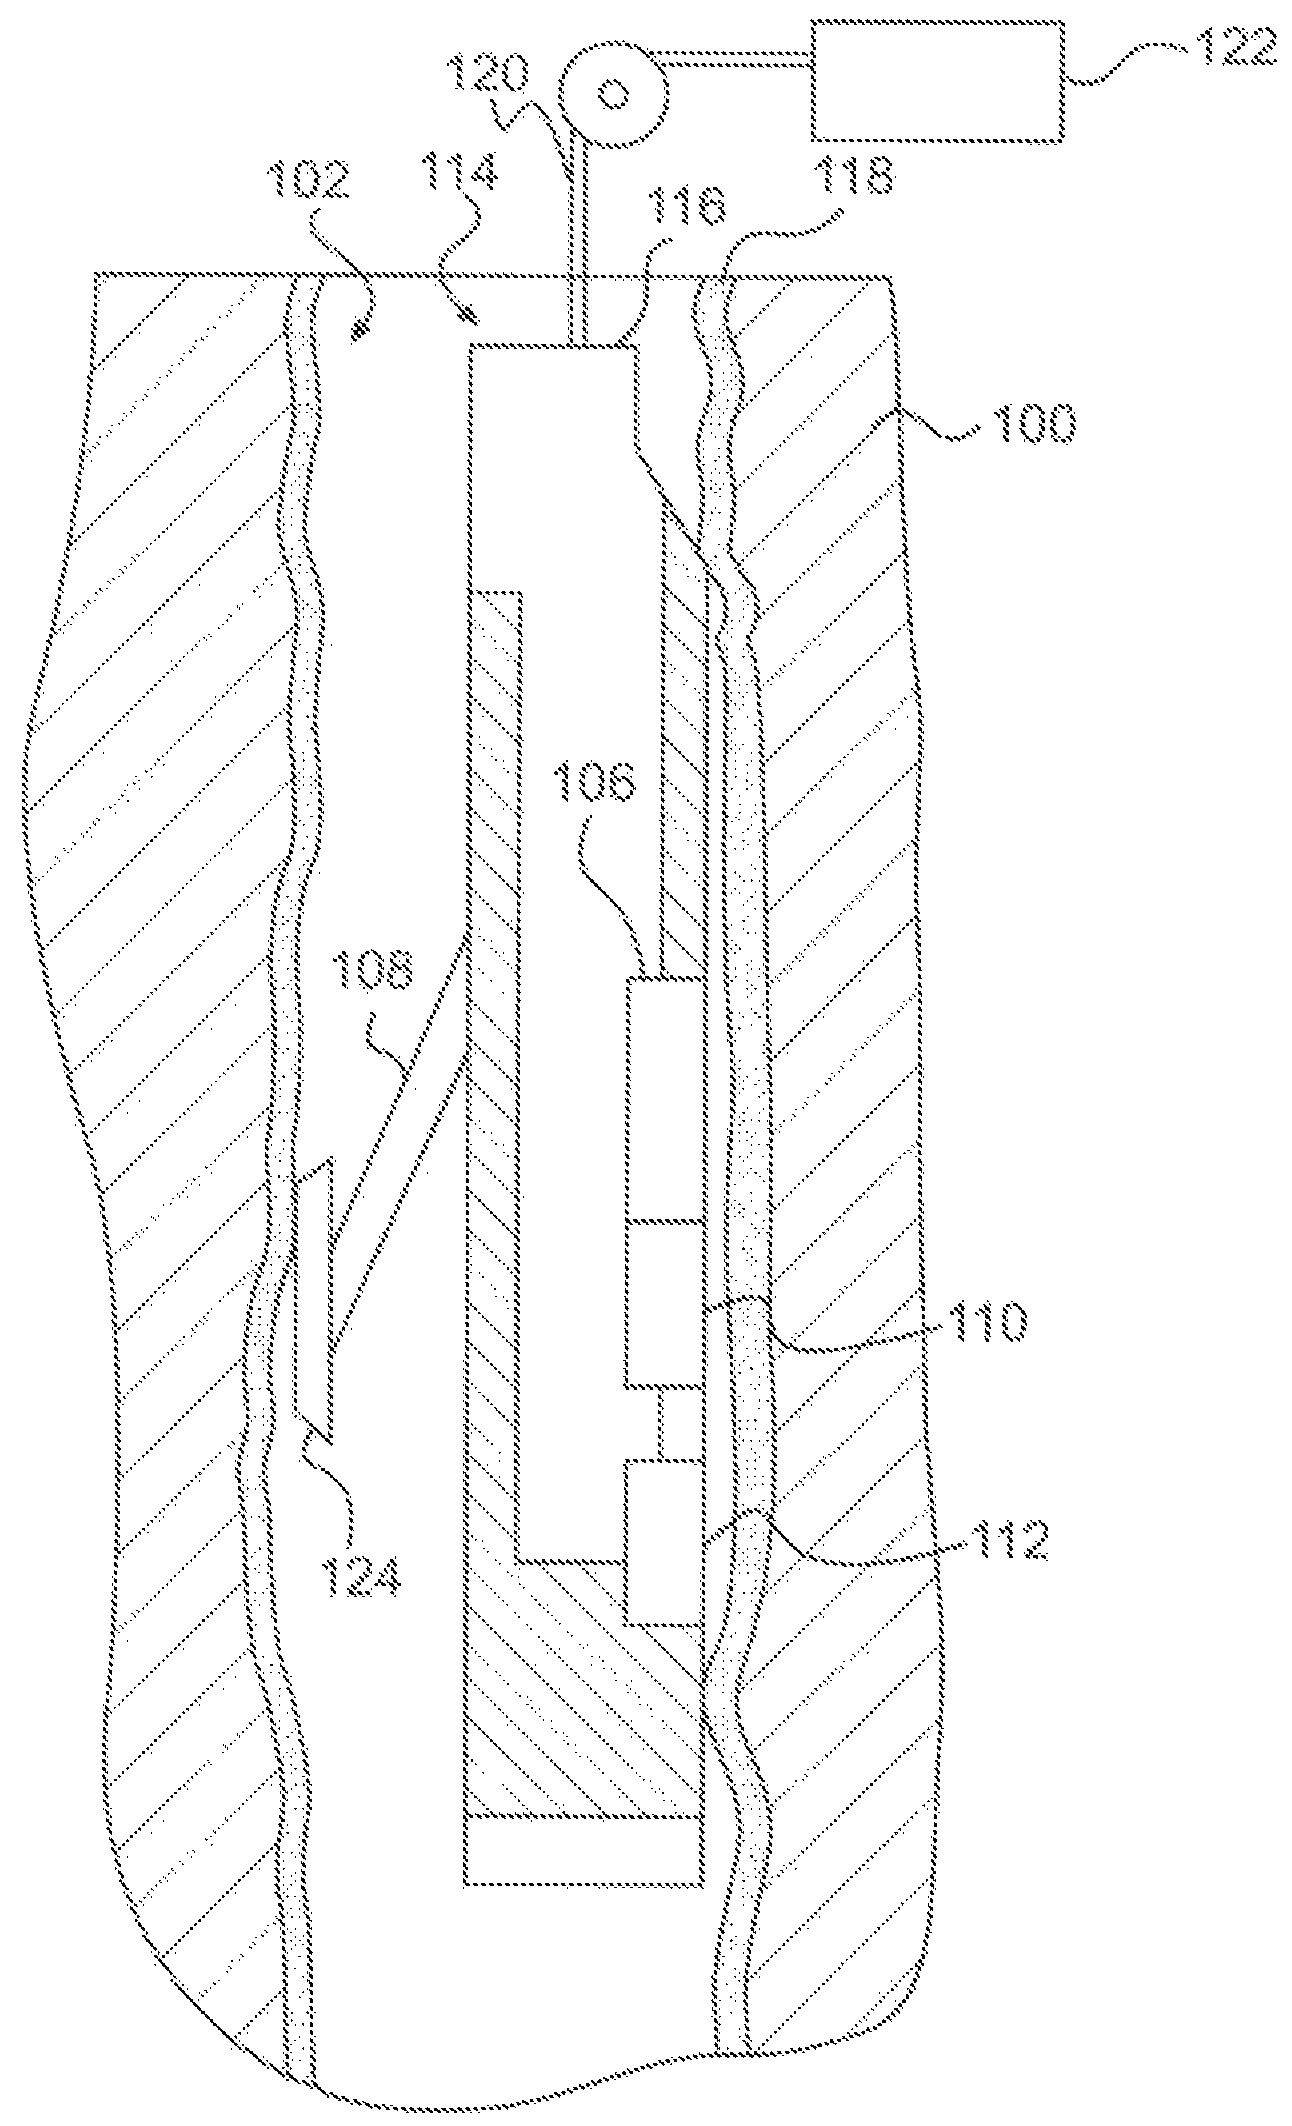 High voltage x-ray generator and related oil well formation analysis apparatus and method